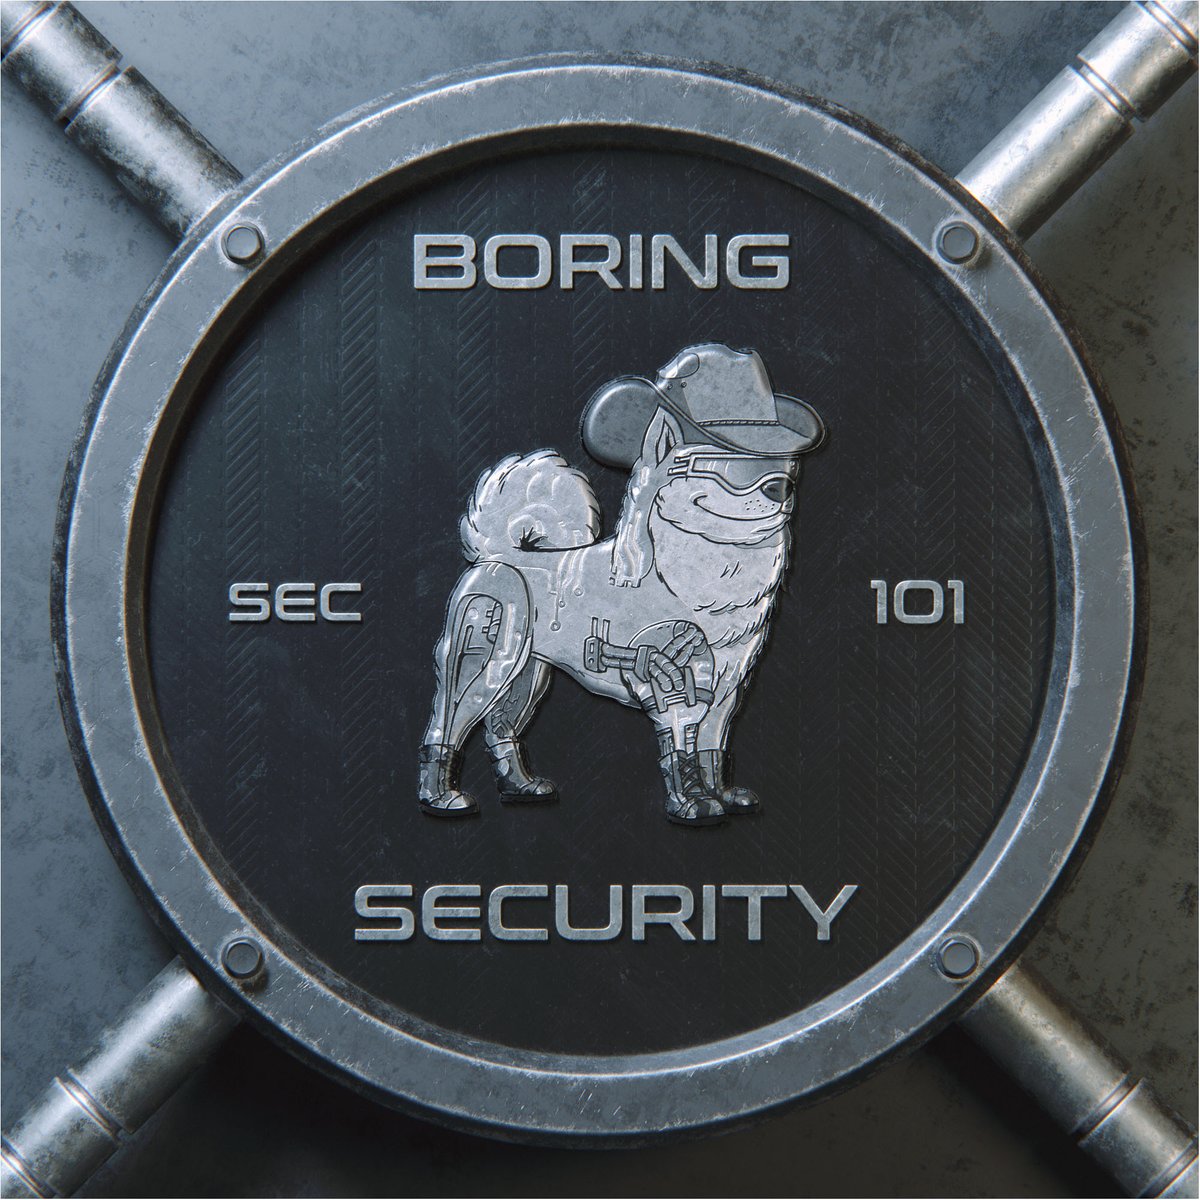 Being part of Web 3 means taking full ownership of your assets. To do this, you NEED to educate yourself with the most basic Security knowledge. #BoringSecurity offers Web 3 Security 101 Classes FOR FREE. Join our next 101 Class on May 2, 8PM ET! Sign up in the link below. 👇